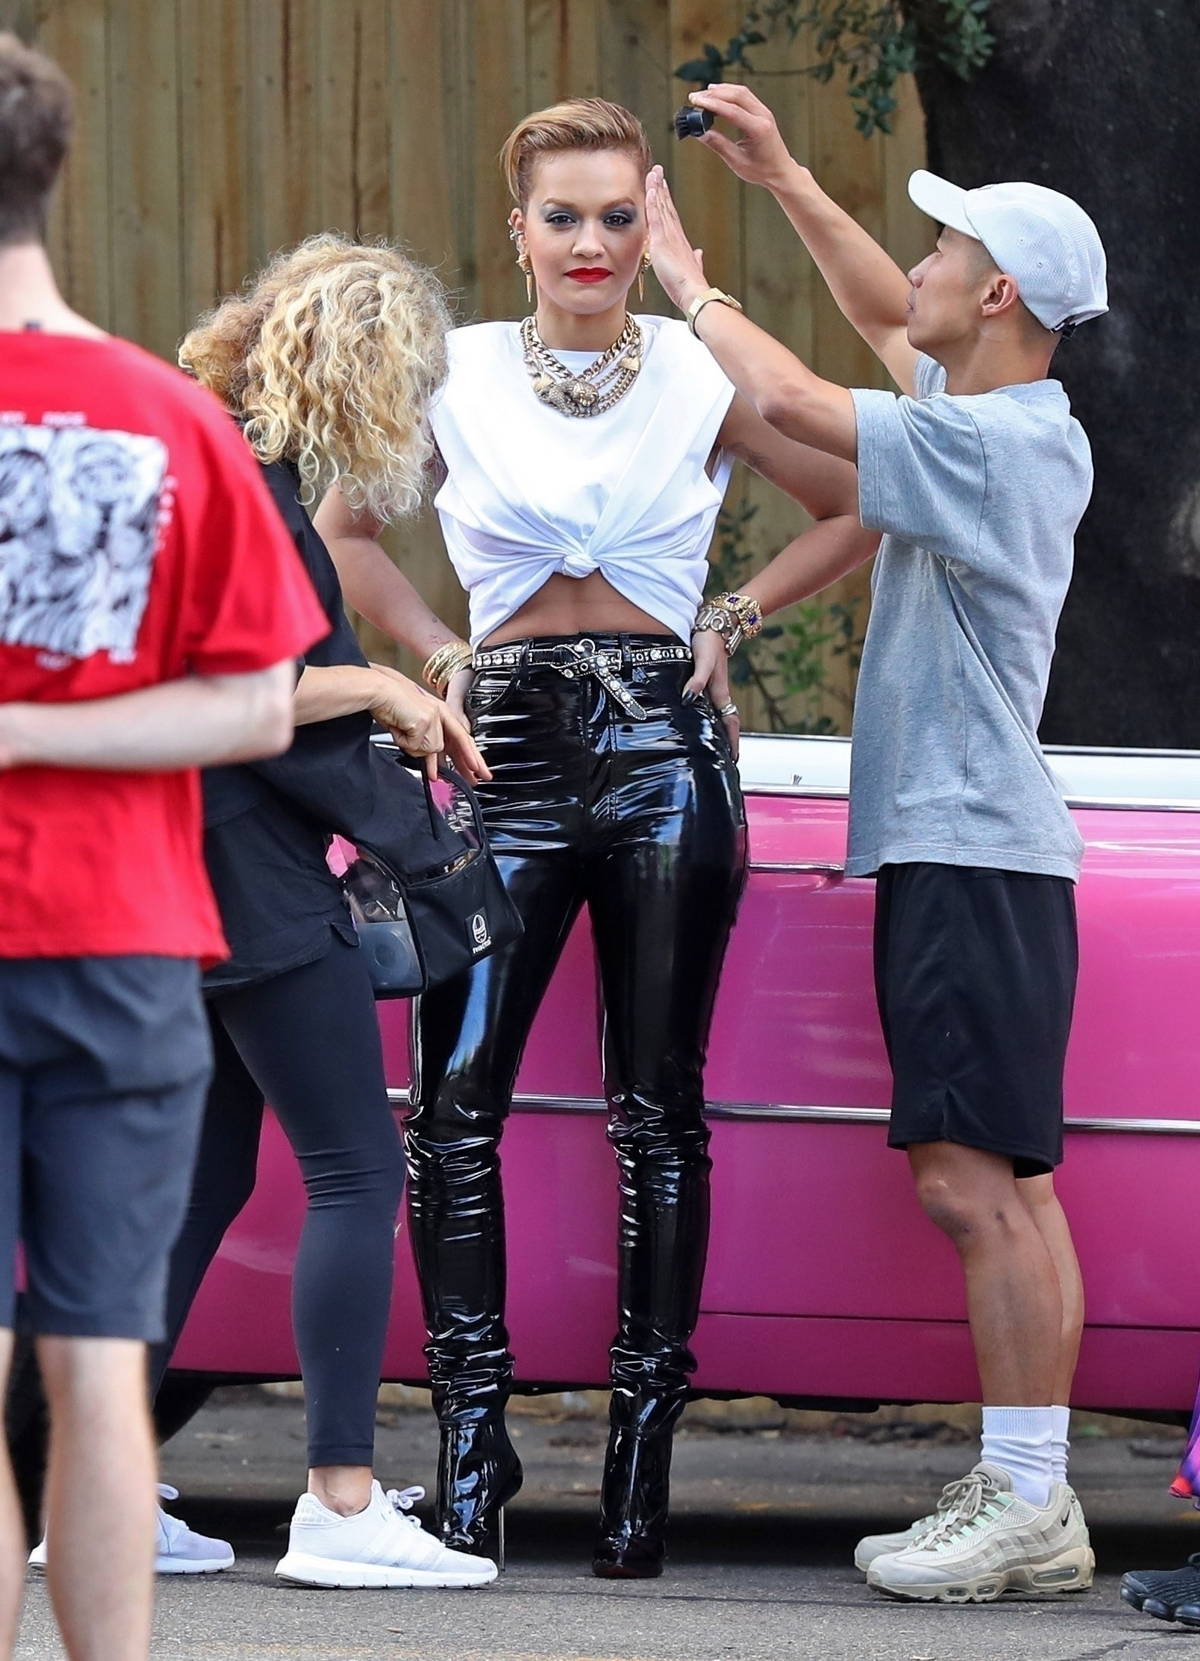 rita ora stuns in skin-tight leather pants while posing with a